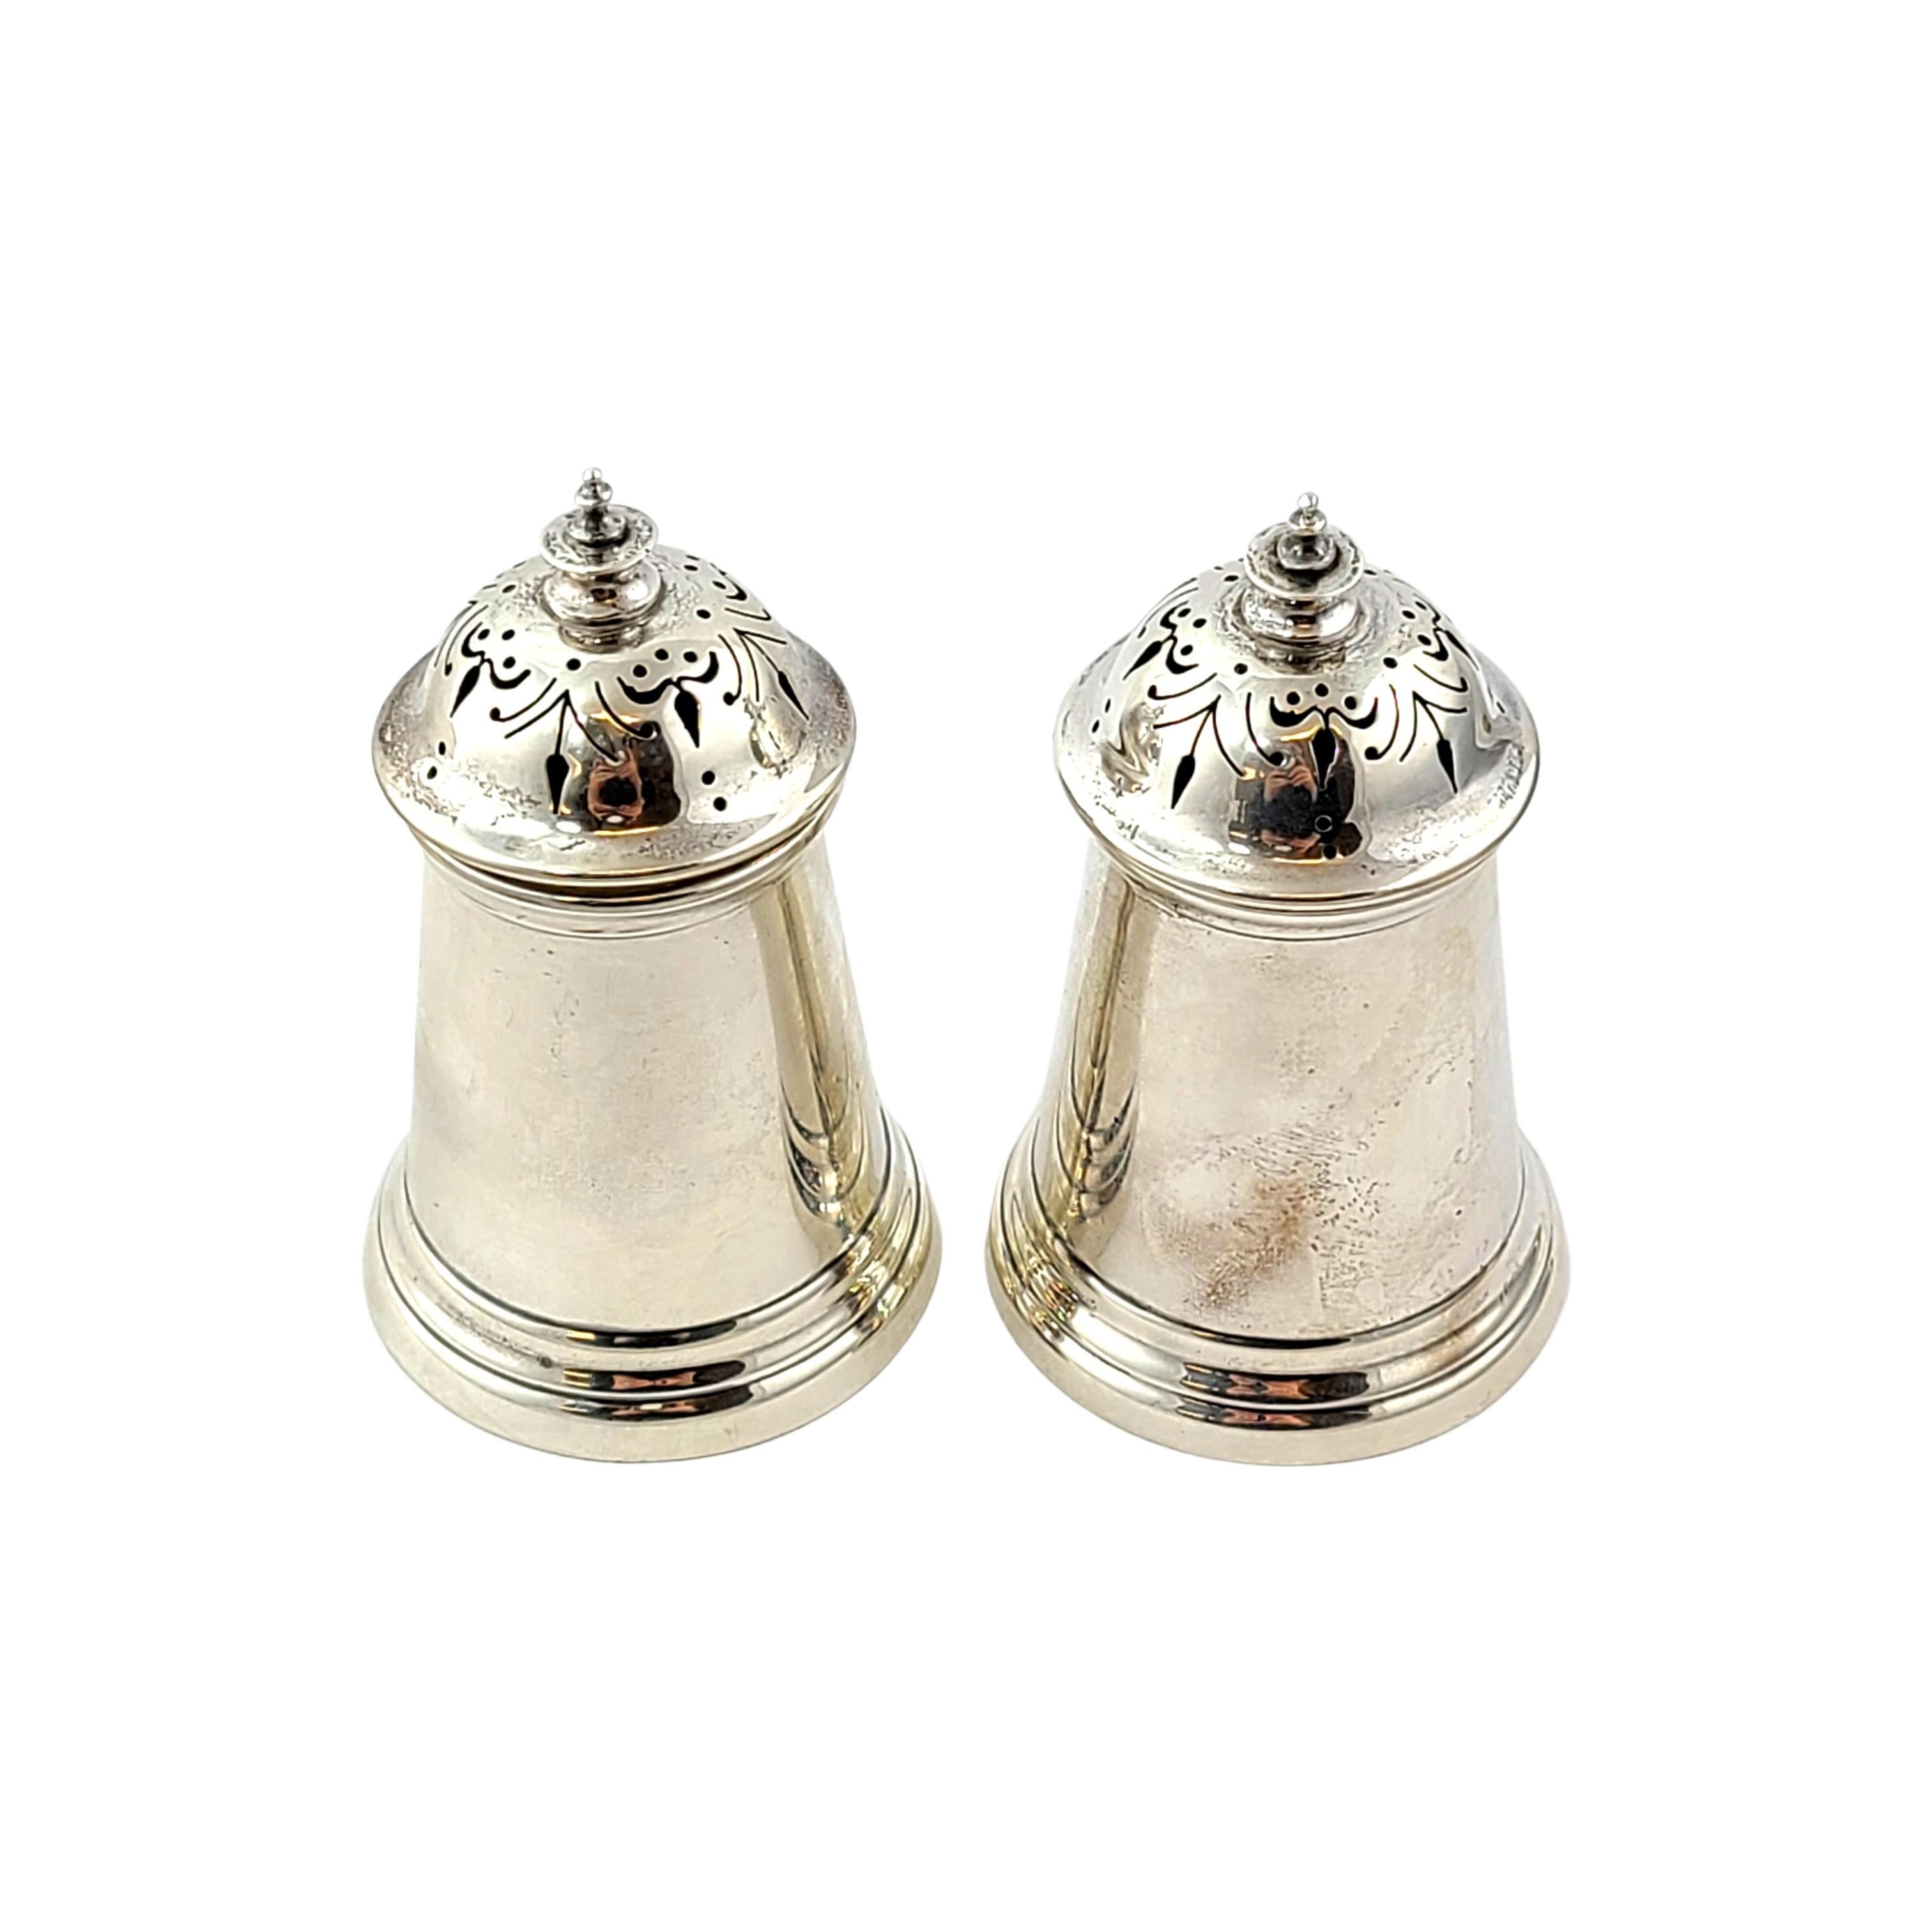 Sterling silver salt and pepper shakers by Wakely & Wheeler of London, circa 1954.

Pair of canister shaped  salt and pepper shakers with stepped base and an ornate pierced design.

Measures approx 3 1/4